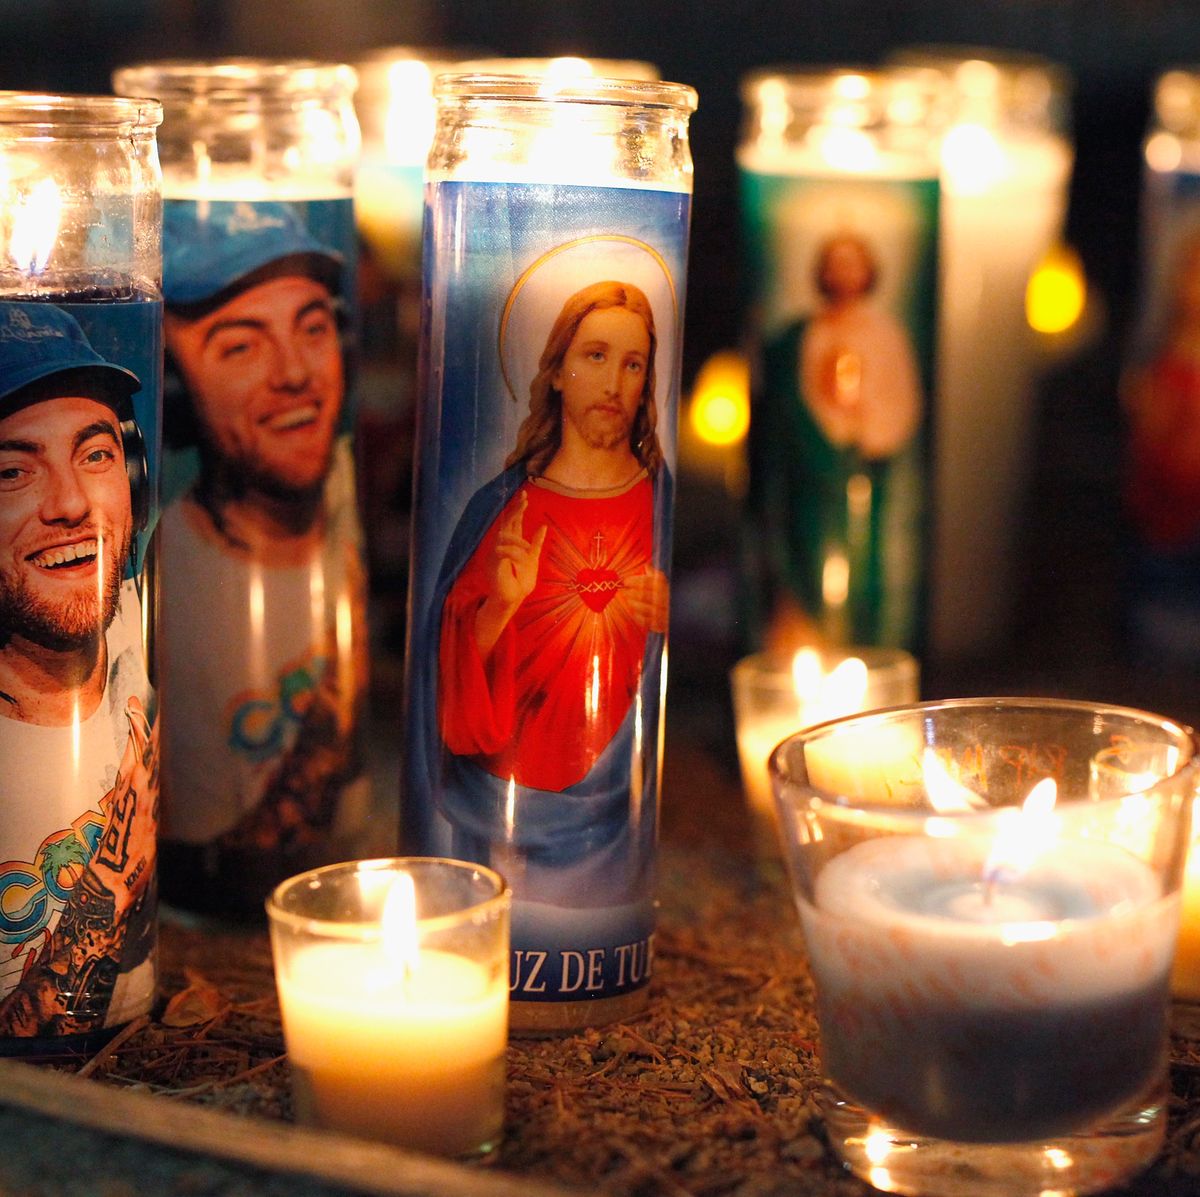 MAC MILLER: 'Celebration of Mac Miller' at Pittsburgh's Blue Slide Park  will mark 1-year anniversary of rapper's death